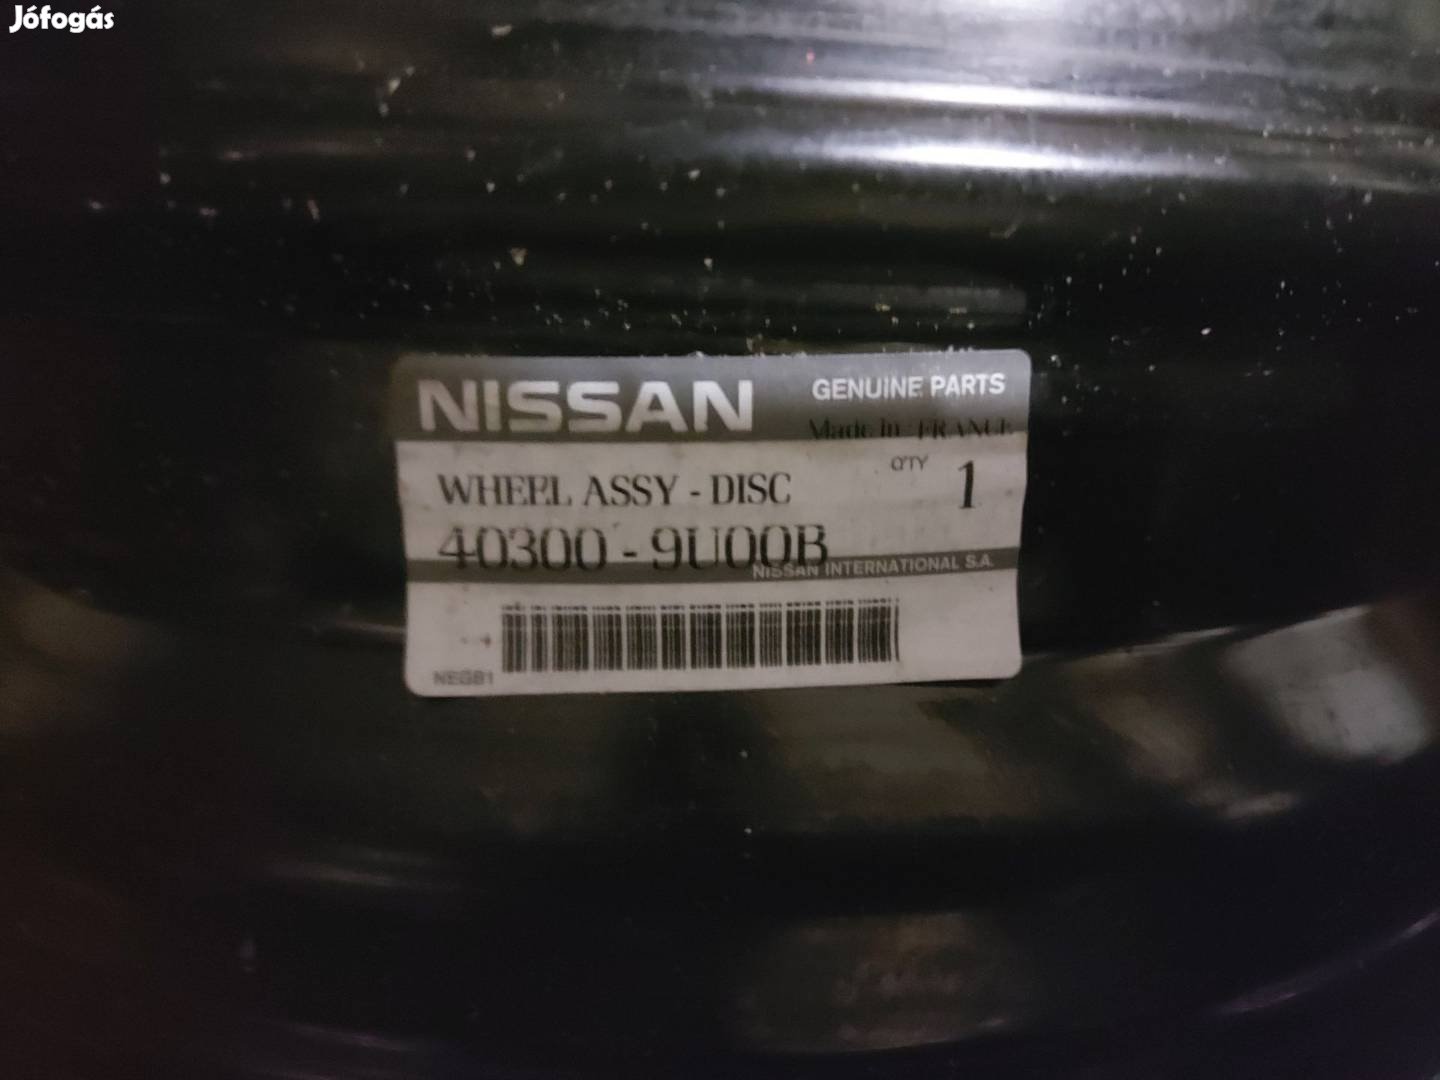 Nissan note 15"